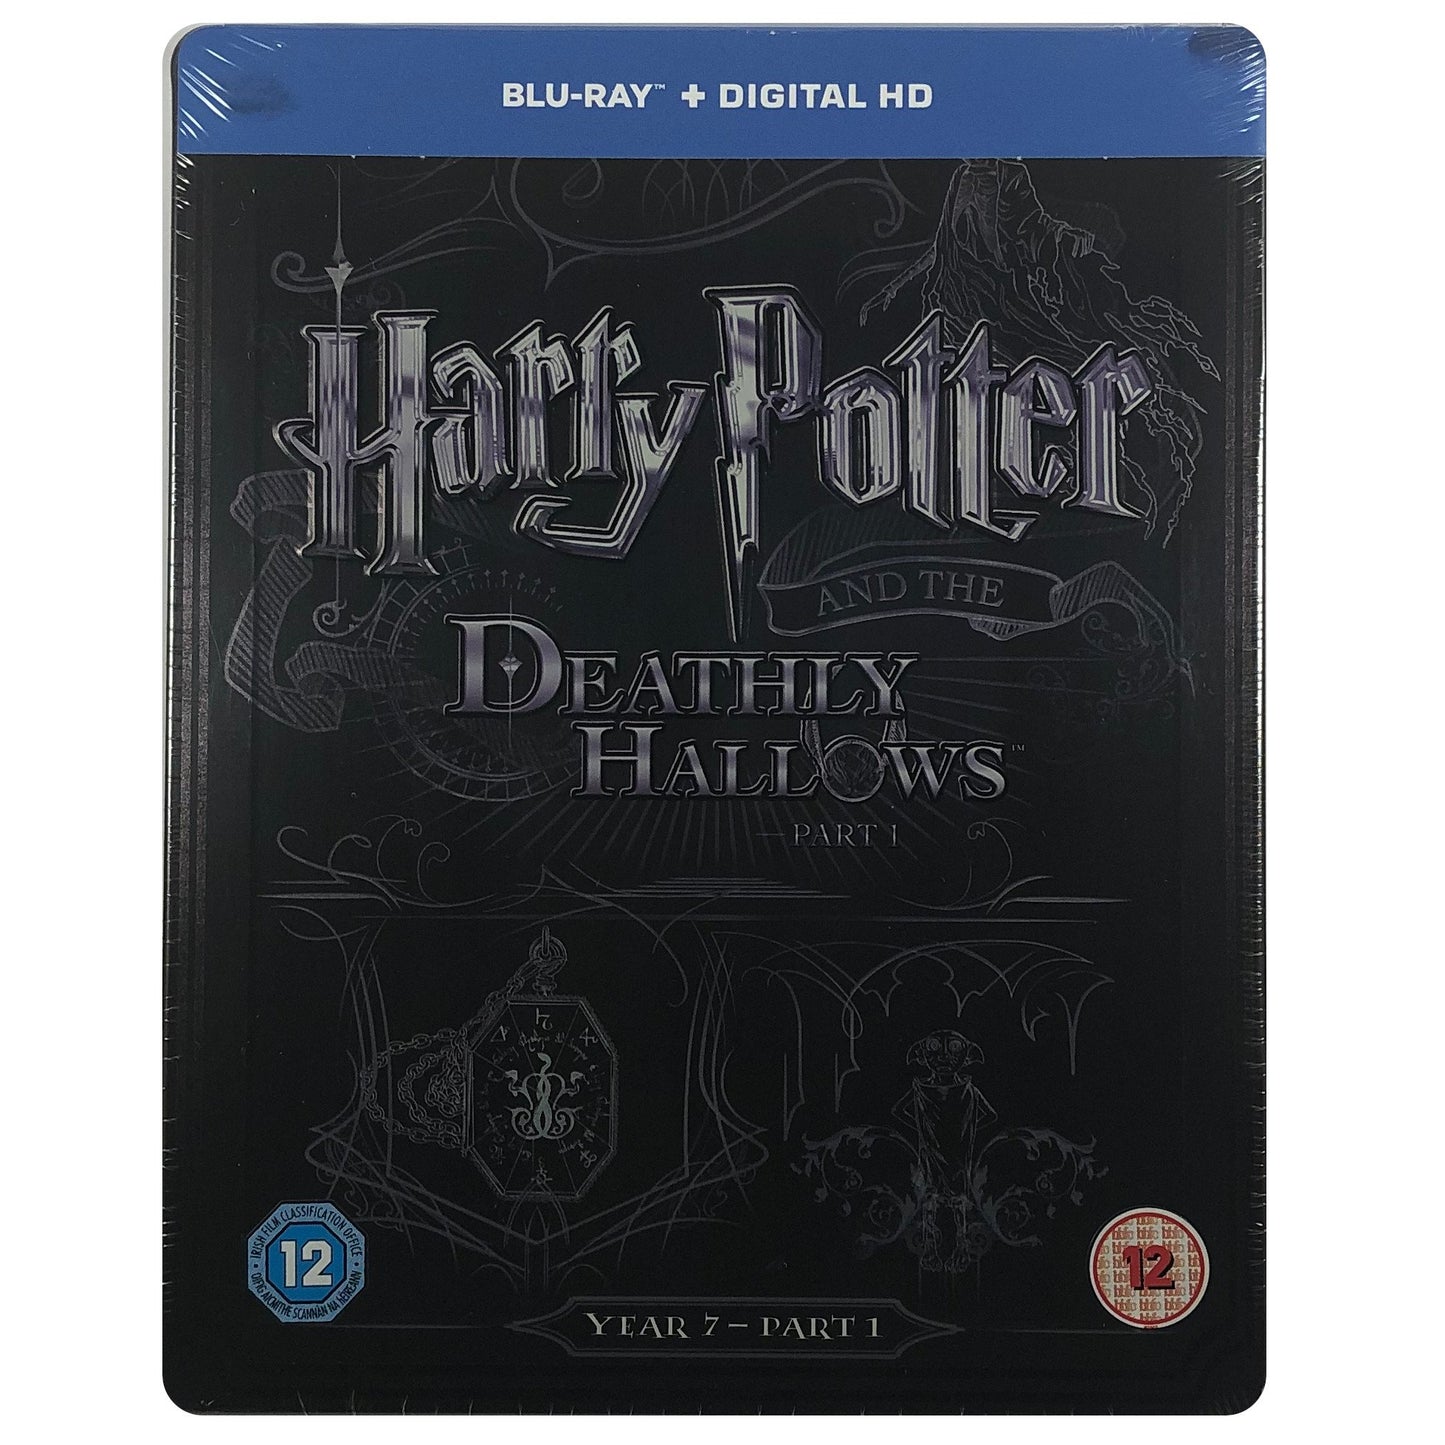 Harry Potter And The Deathly Hallows Part 1 Blu-Ray Steelbook